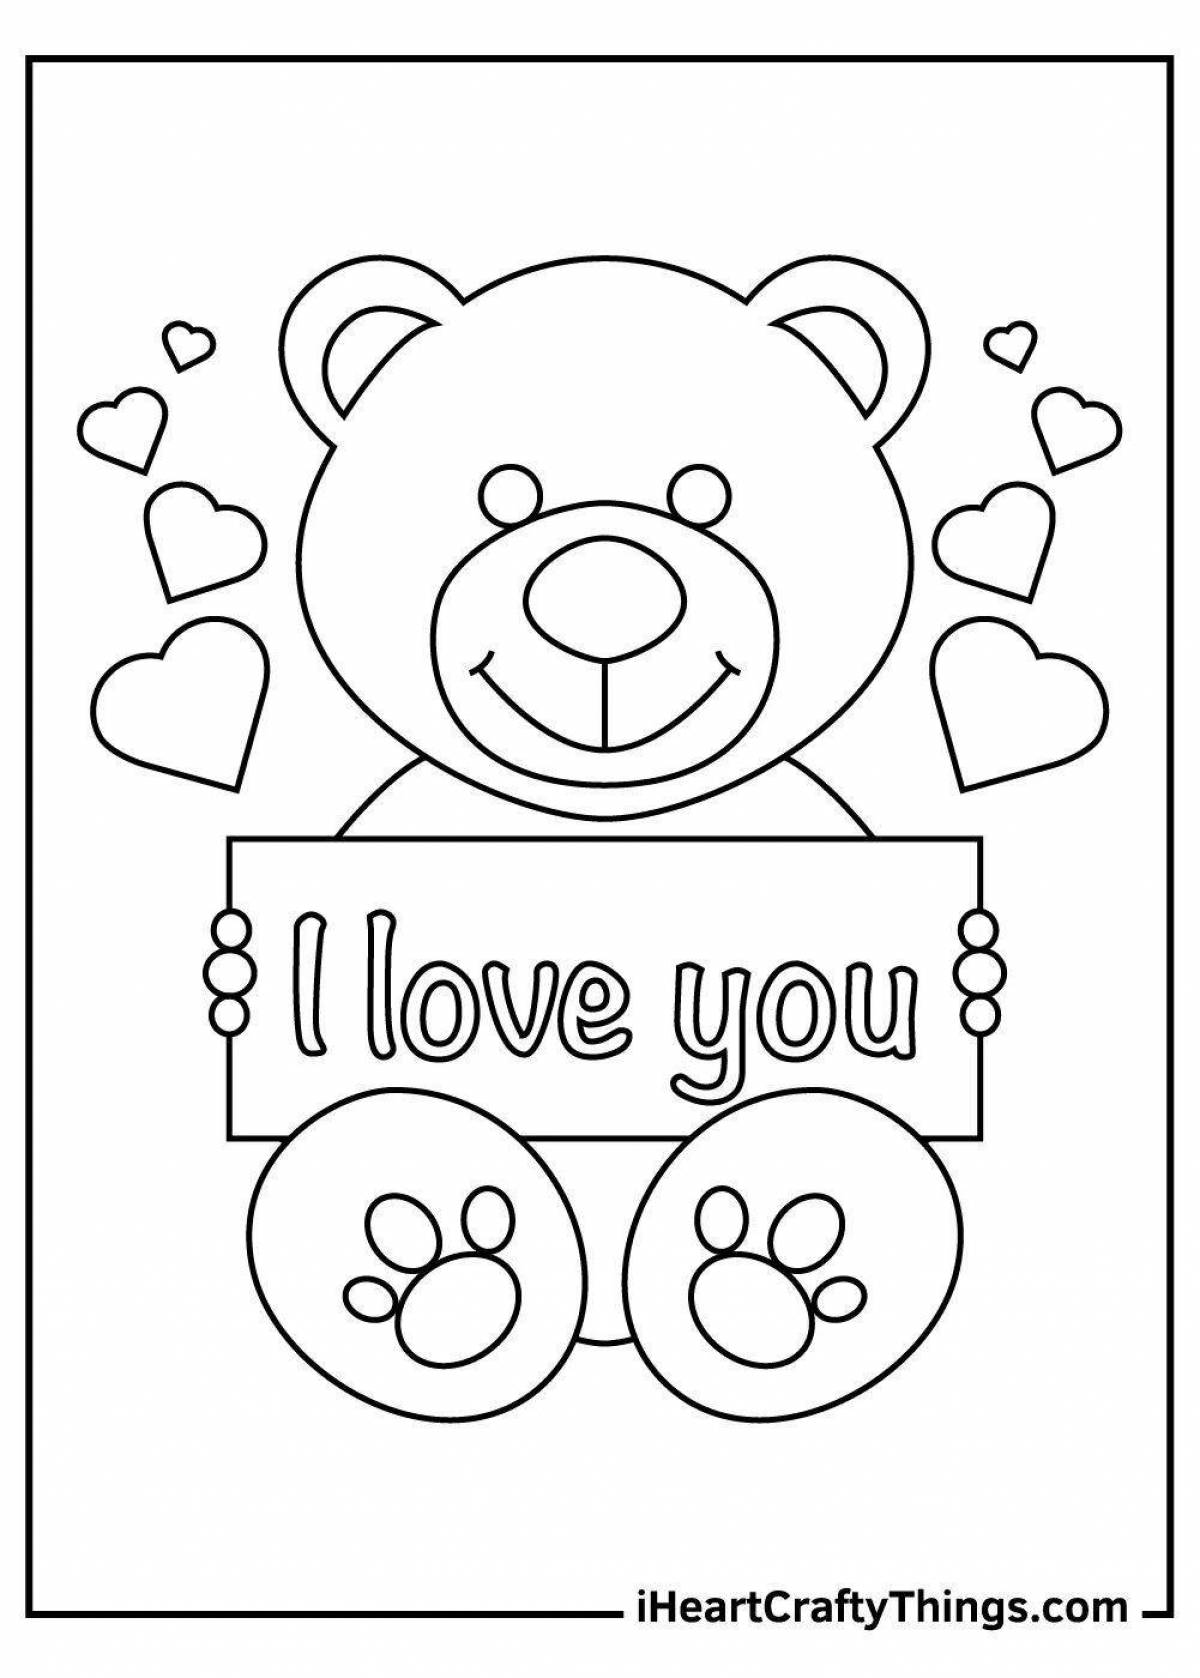 Lively i love you coloring book